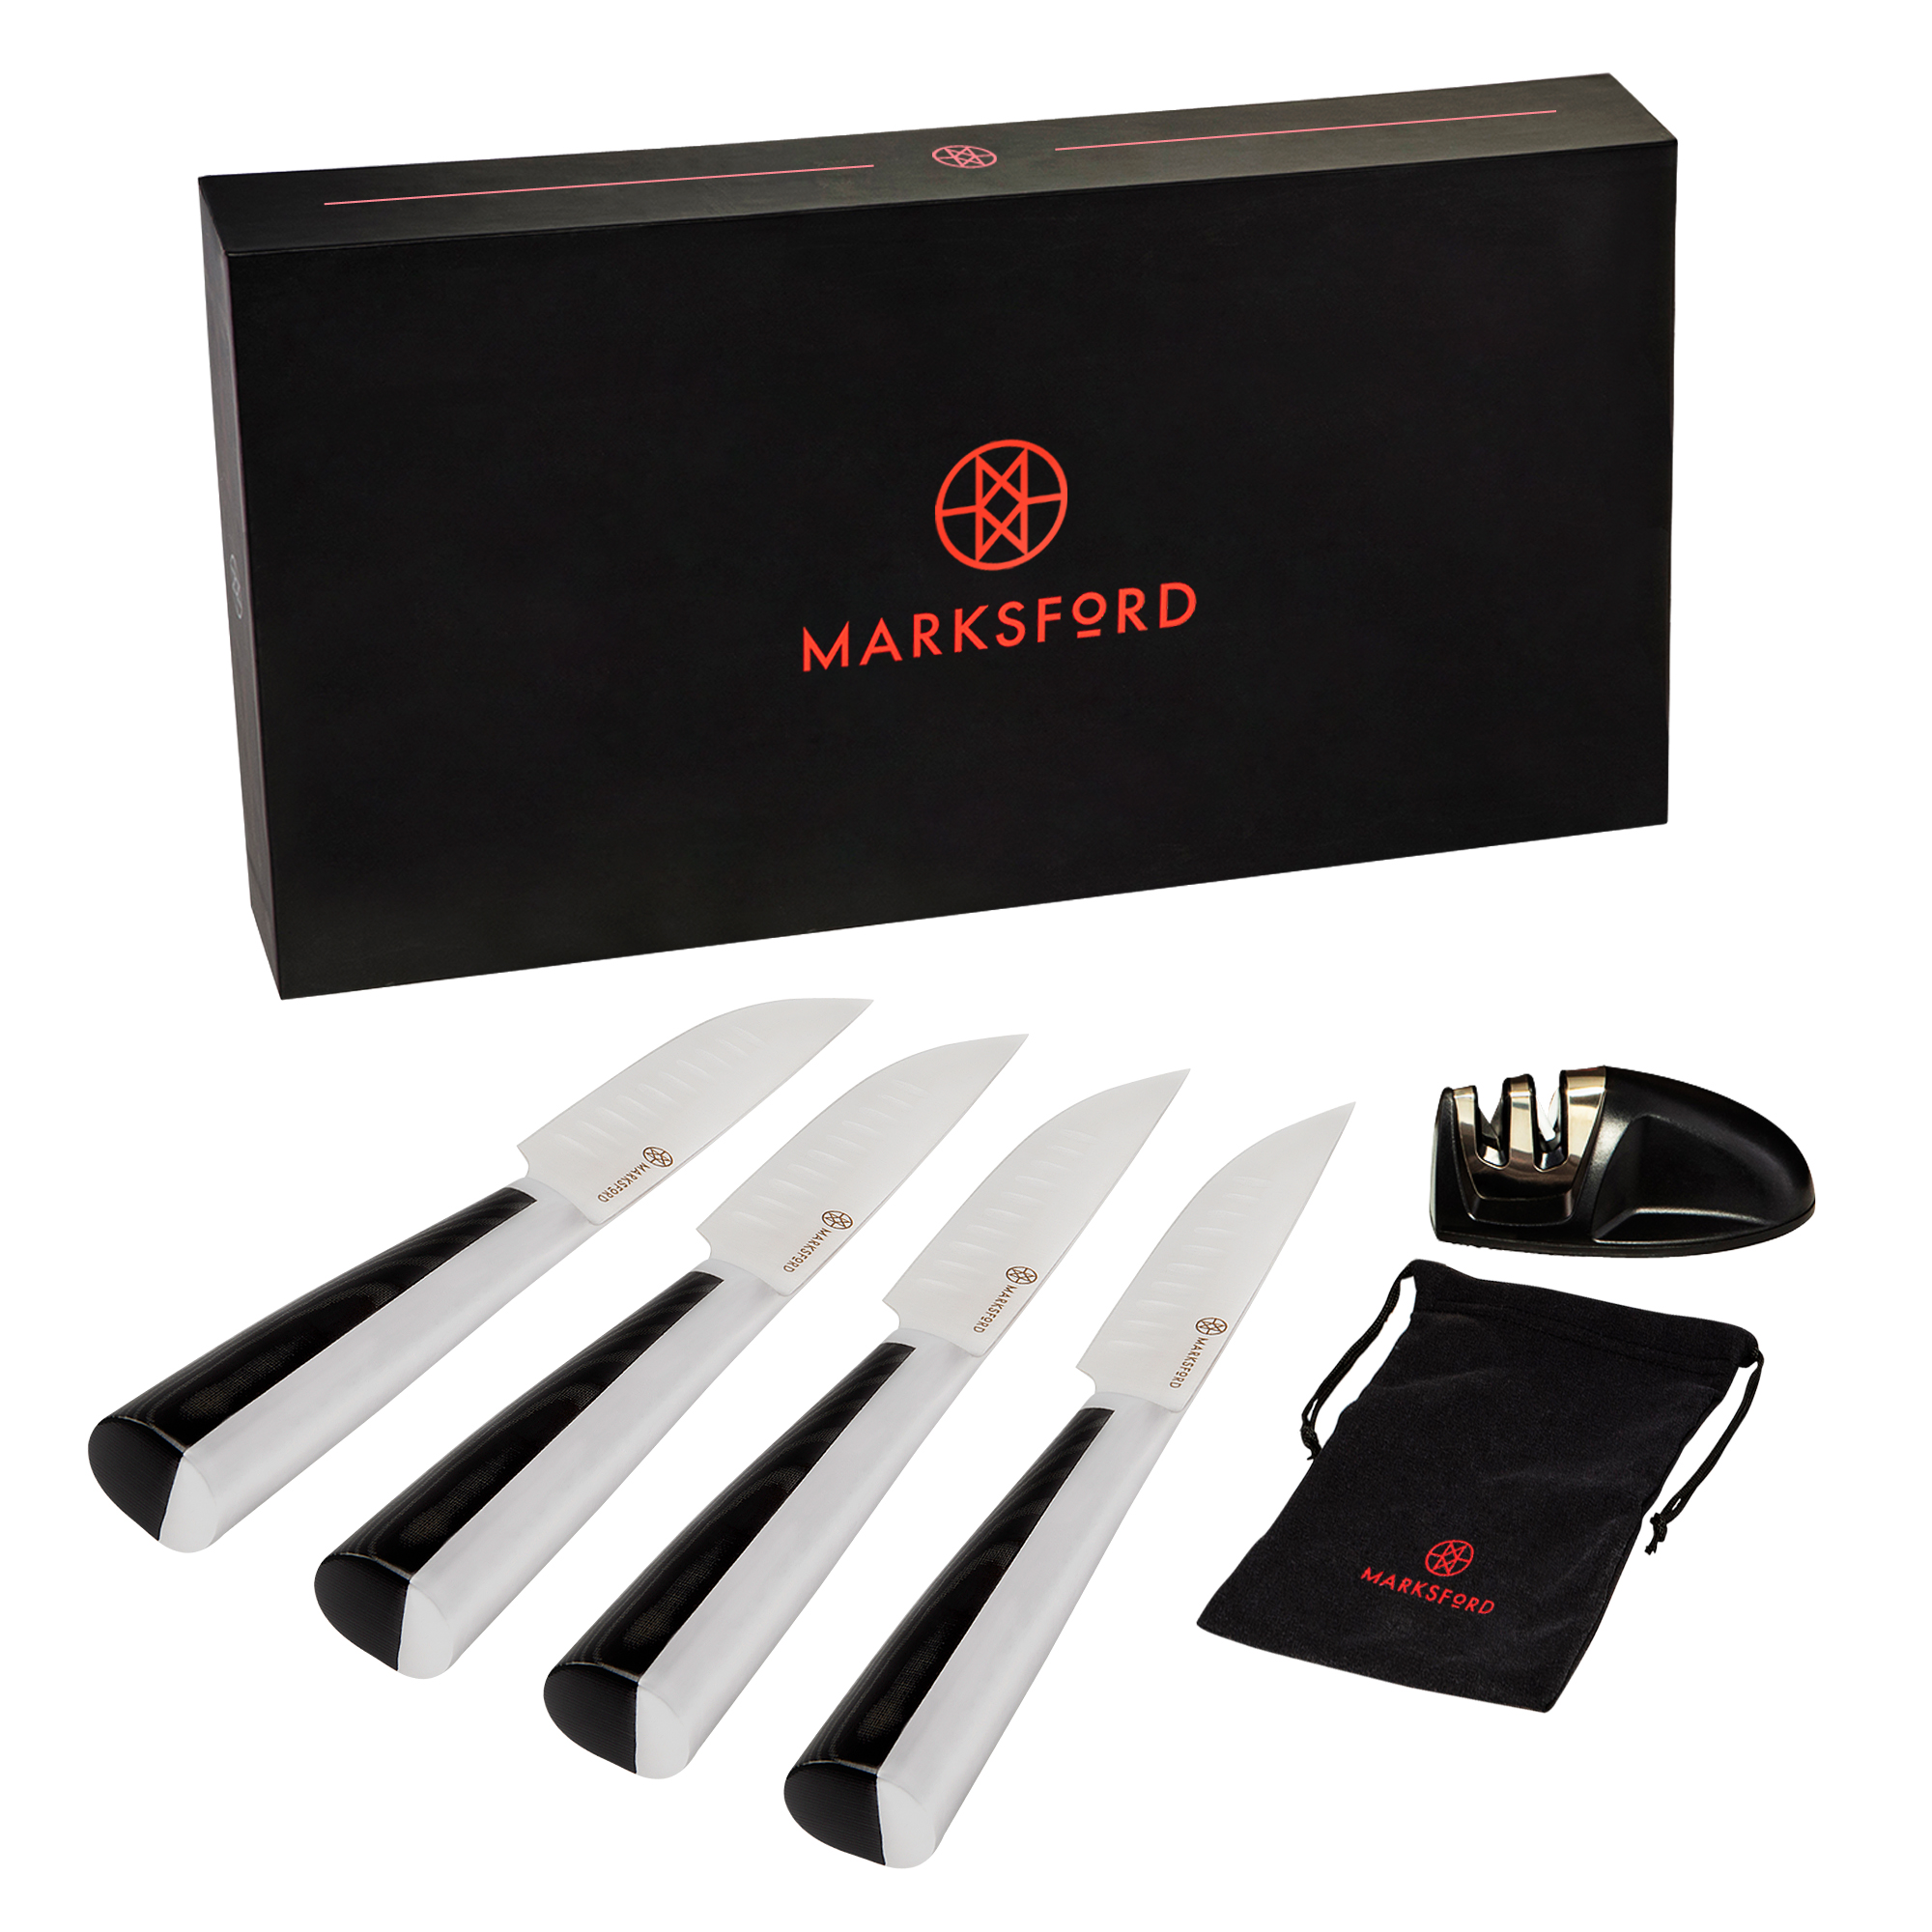 Marksford Launches Their New Jasper Series of Steak Knives